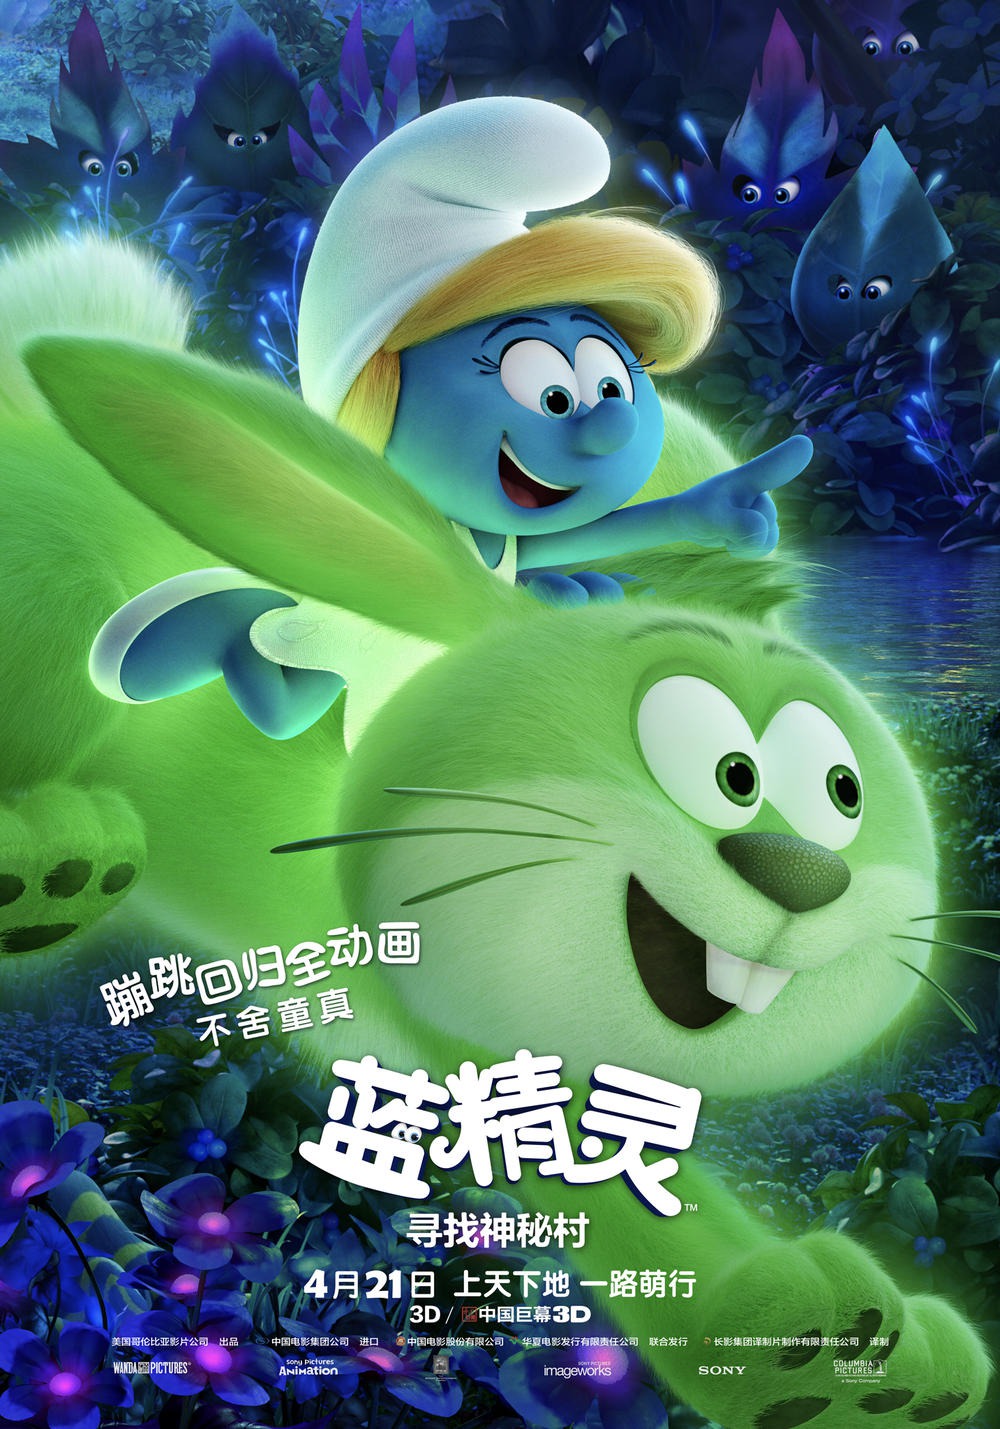 Extra Large Movie Poster Image for Smurfs: The Lost Village (#9 of 13)